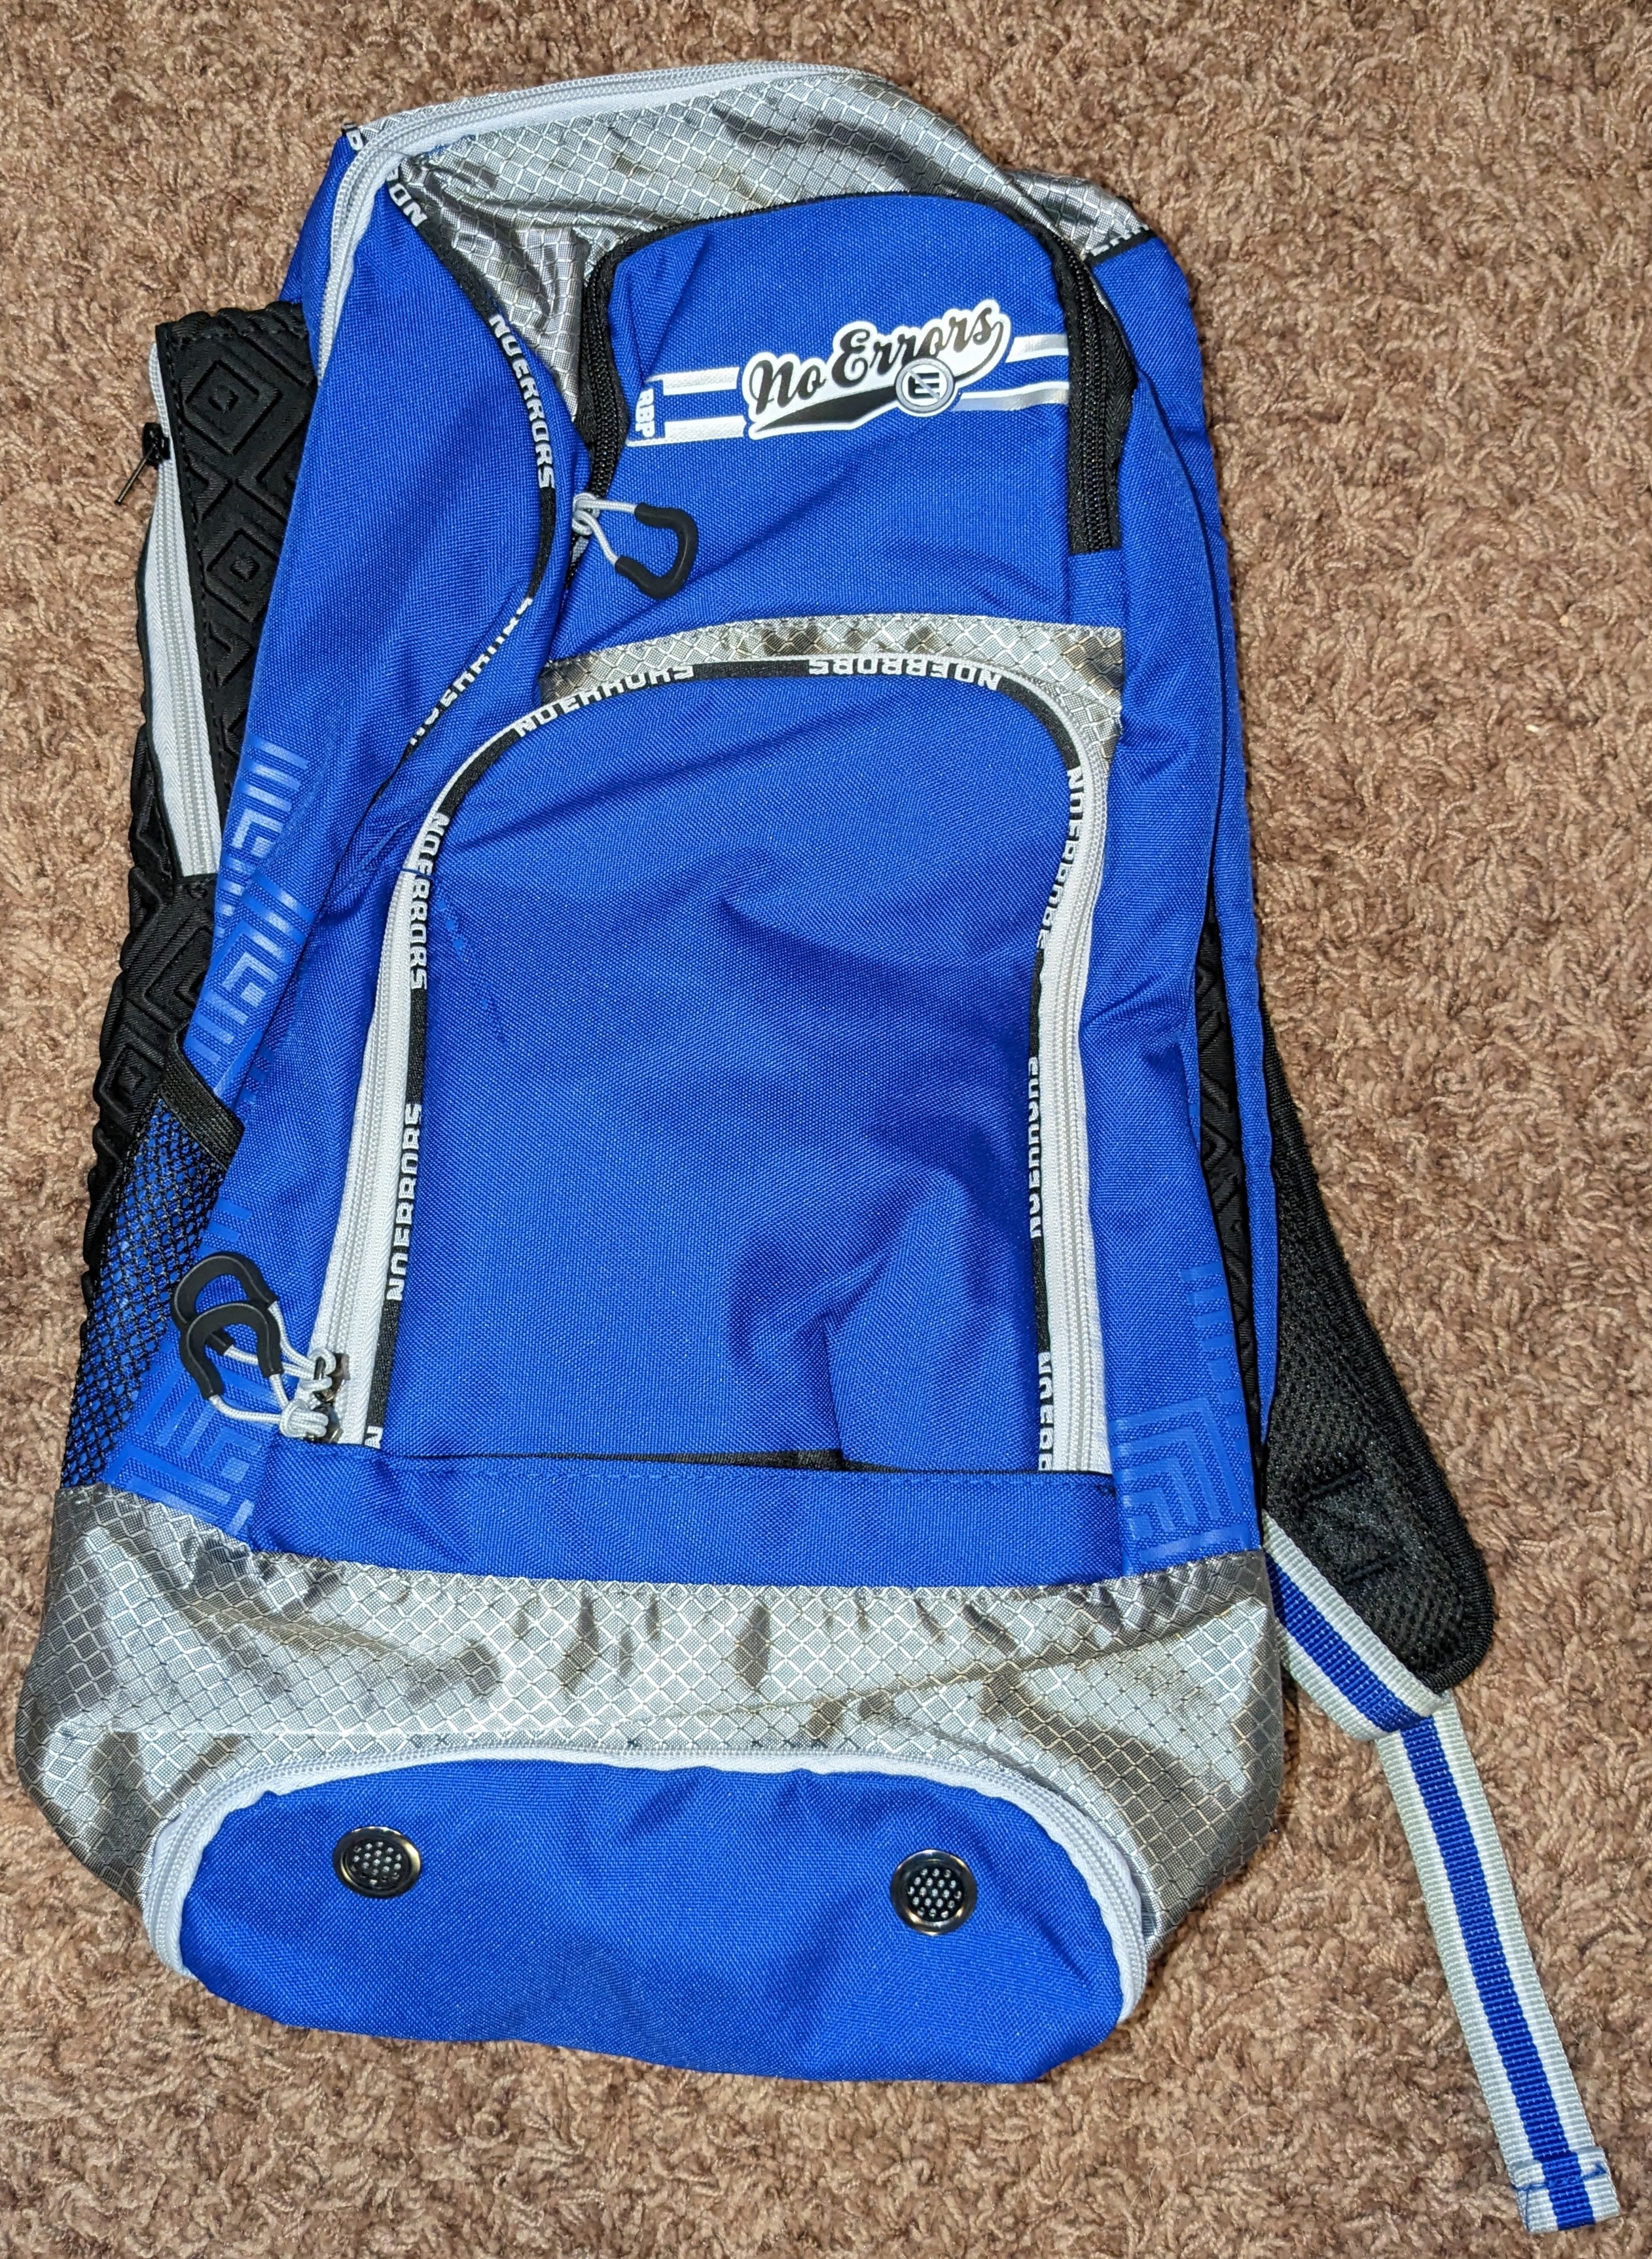 Used No Errors RBP Backpack Bag (Never Used) - Pro Game Sports